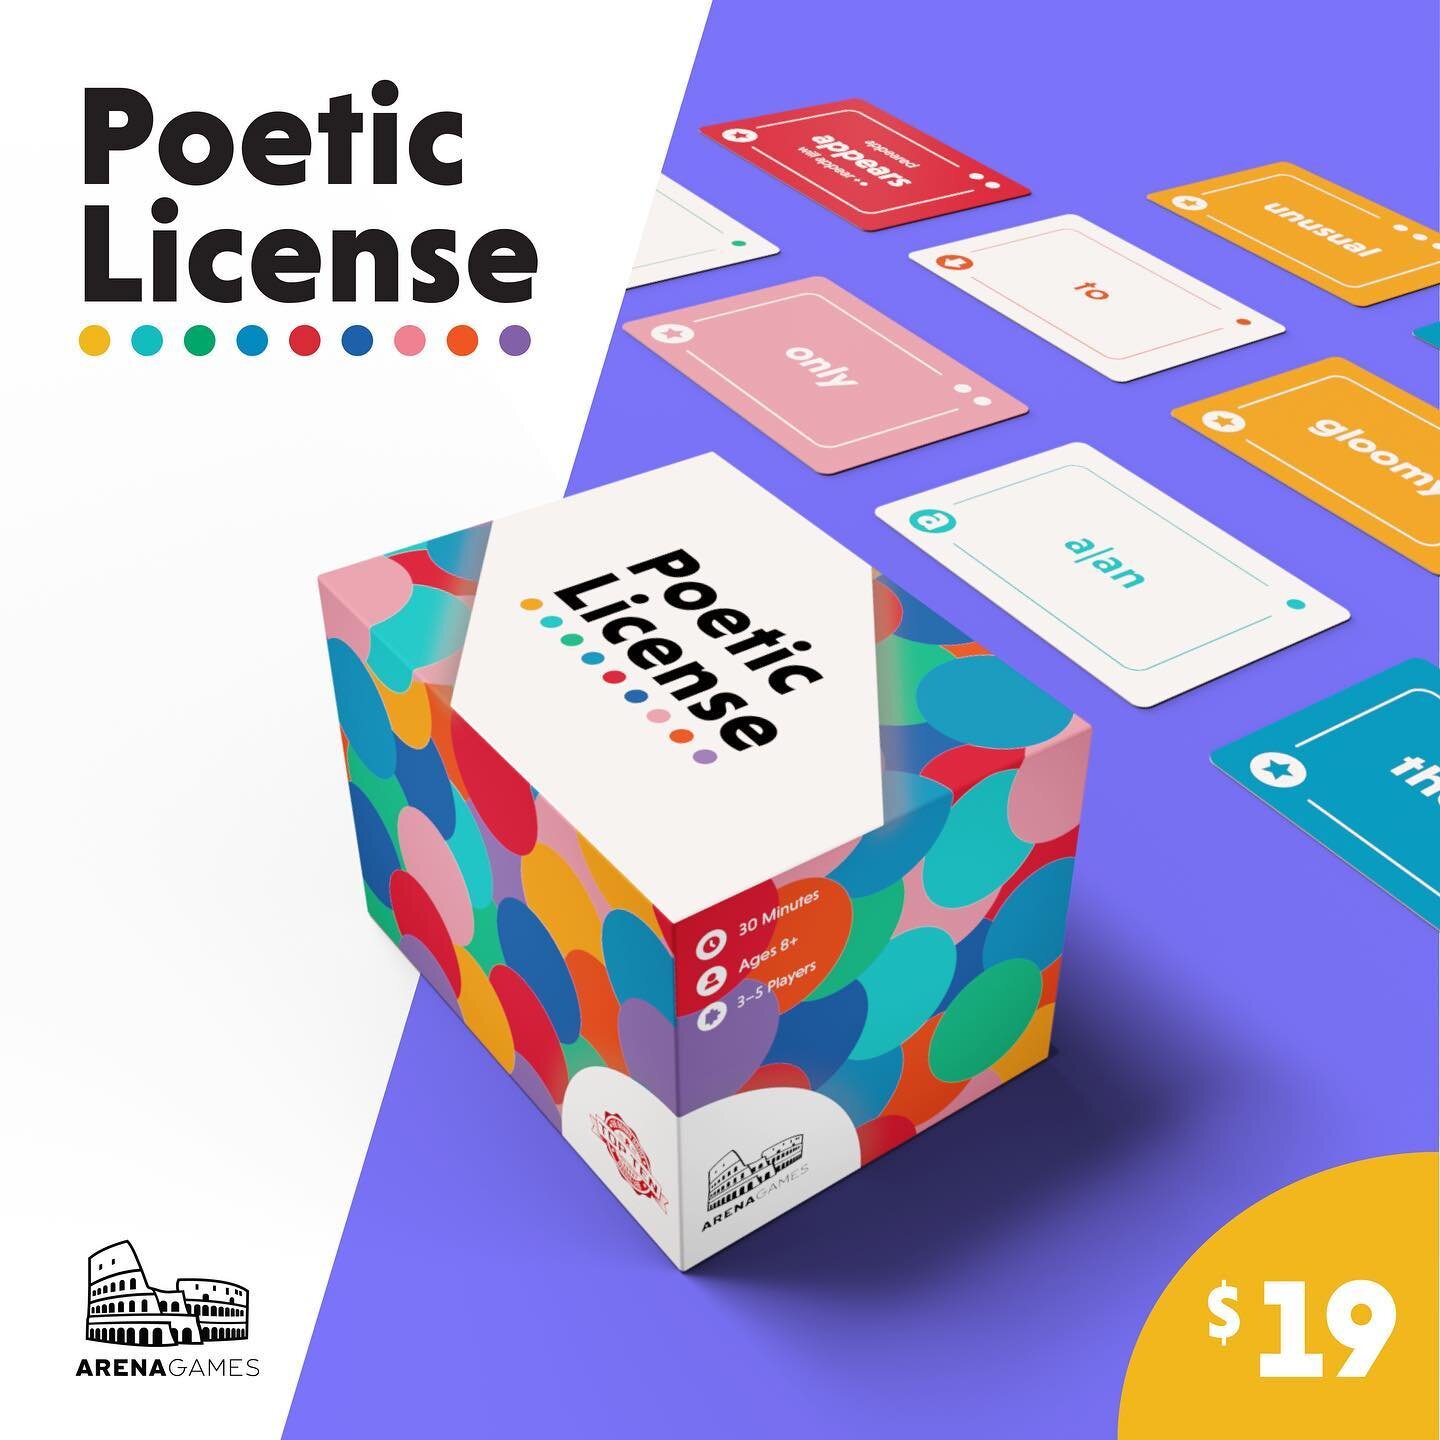 We are so excited to announce that the pre-launch page for Poetic License is now LIVE! Be sure to check out the link in our bio and click the notify me button so you know when our campaign begins!
&bull;
#kickstarter #kickstartergames #kickstartergam